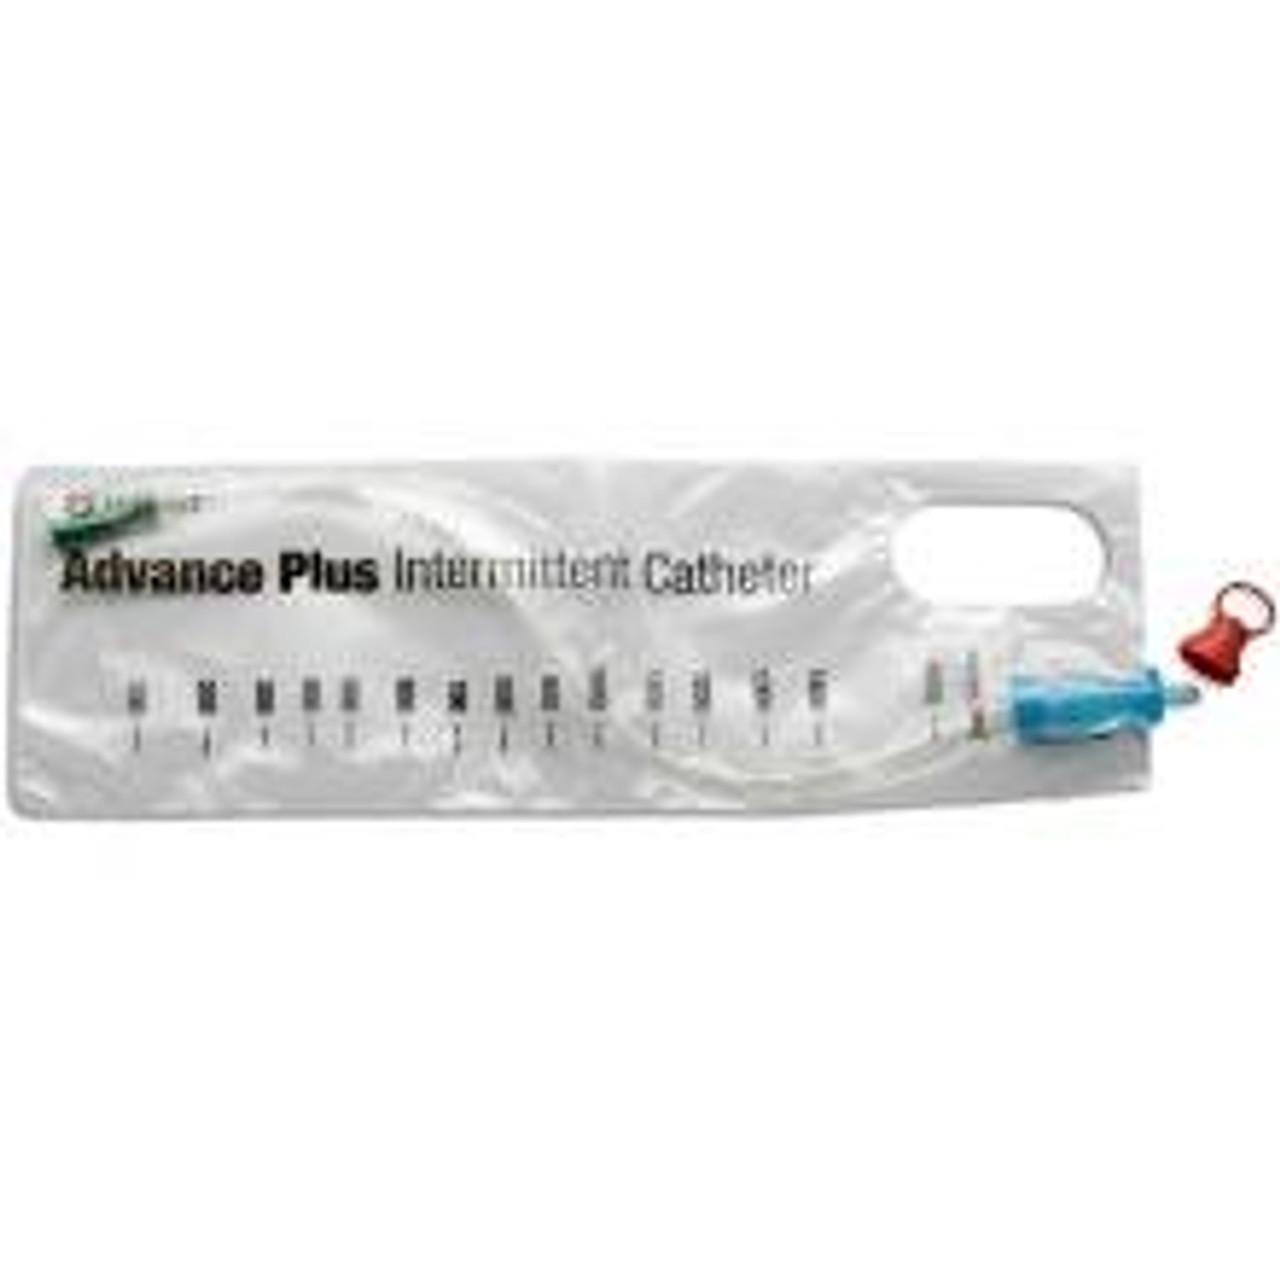 ADVANCE TOUCH-FREE CATHETER, 12FR, 8" BX/30 (HOL-92122)